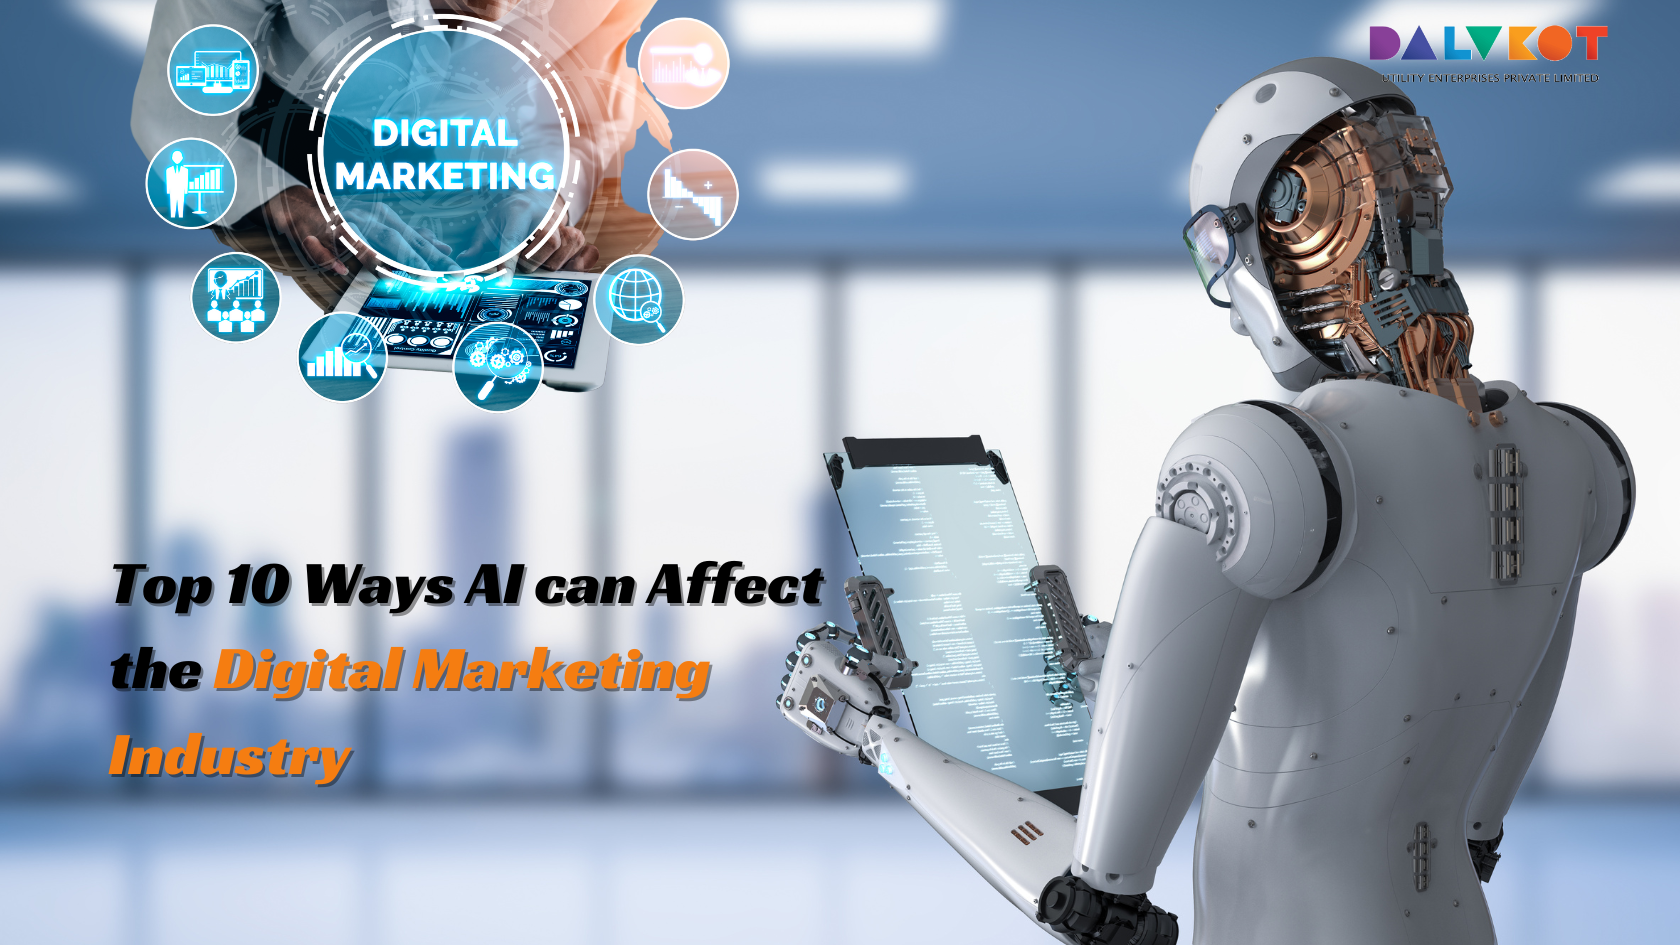 What are the top 10 Ways AI can Affect the Digital Marketing Industry